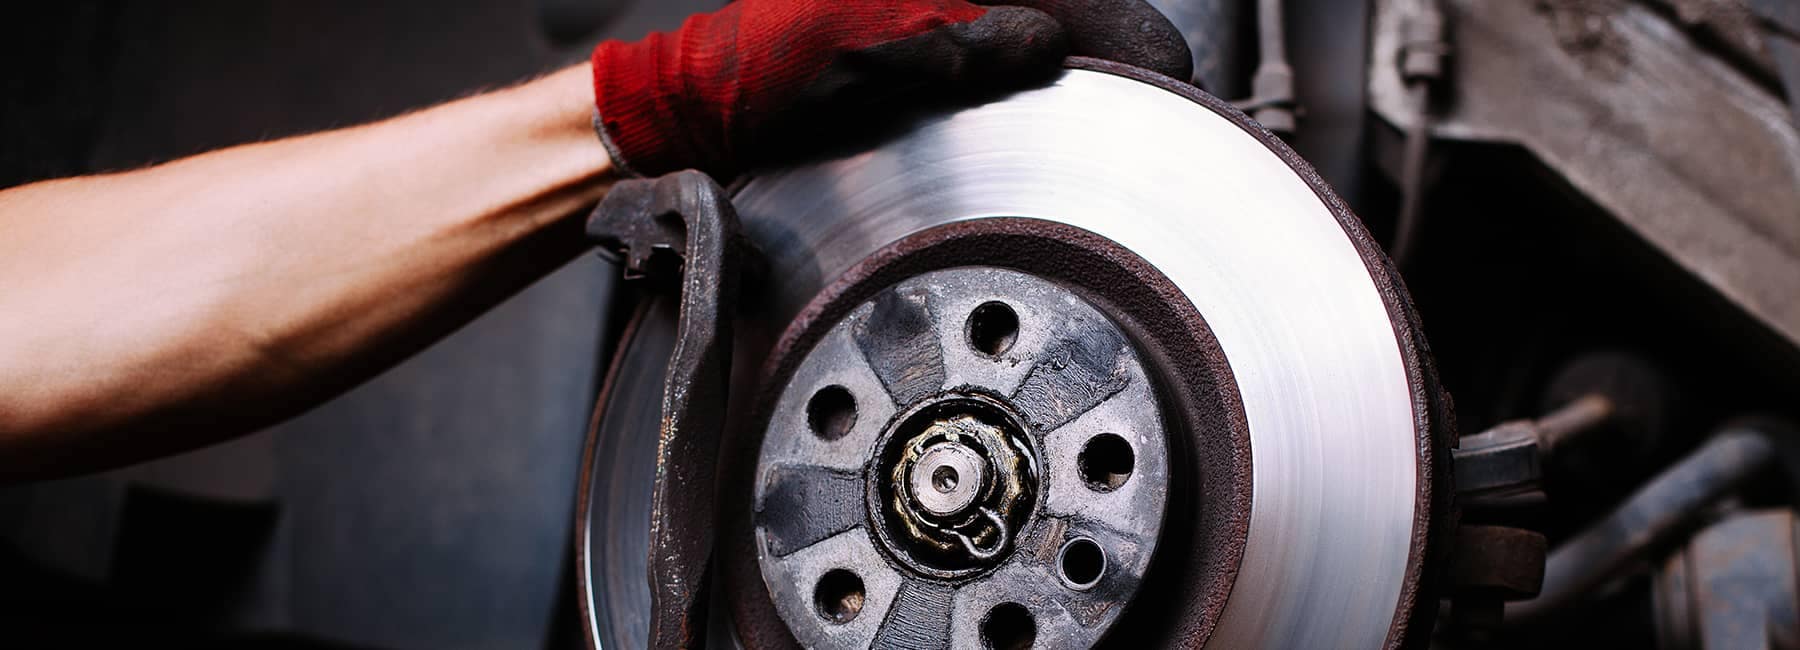 Replacing brakes on a vehicle